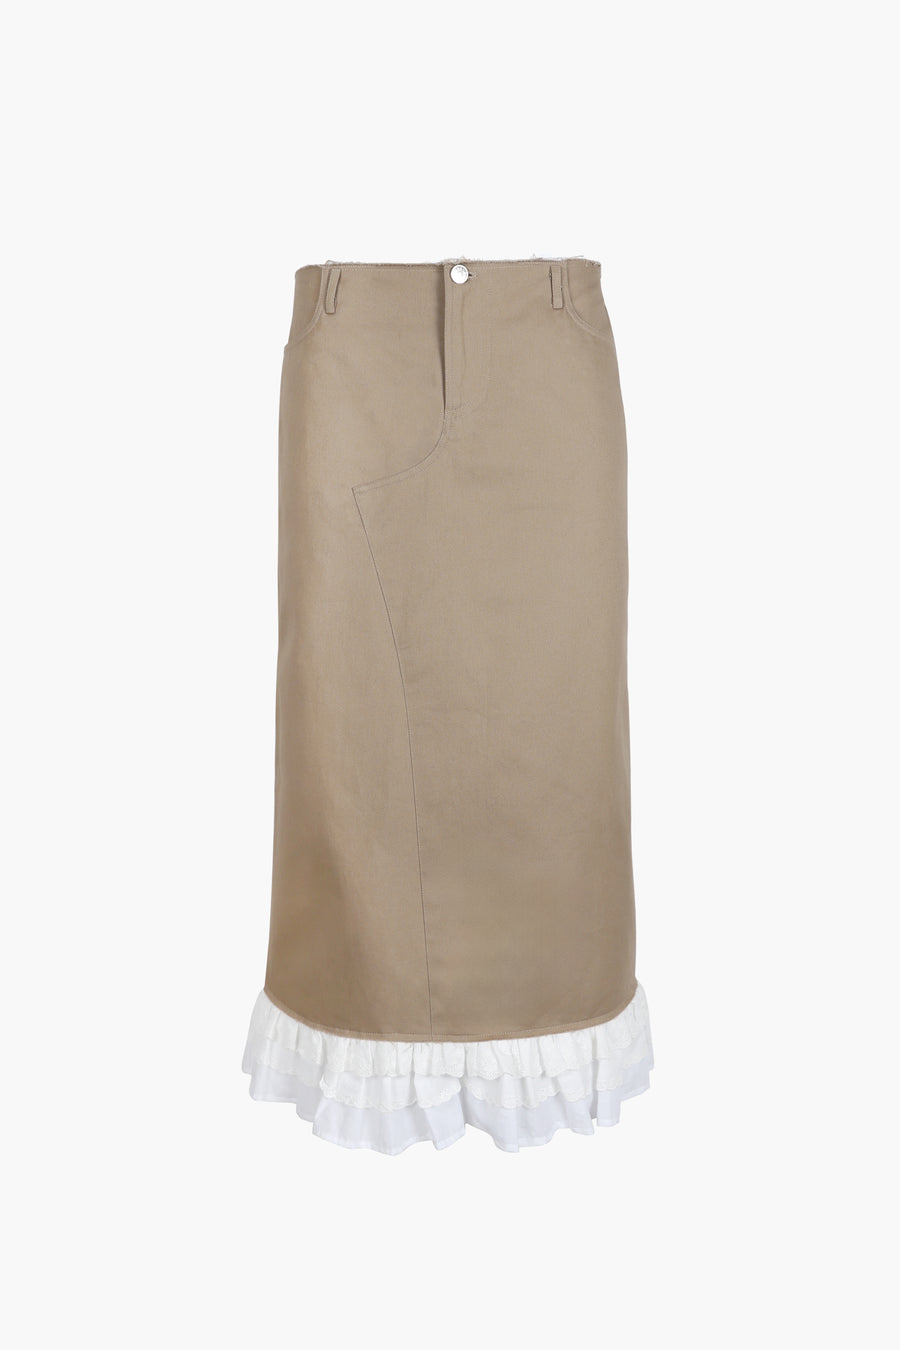 Midi skirt in taupe with eyelet ruffles on hem and back